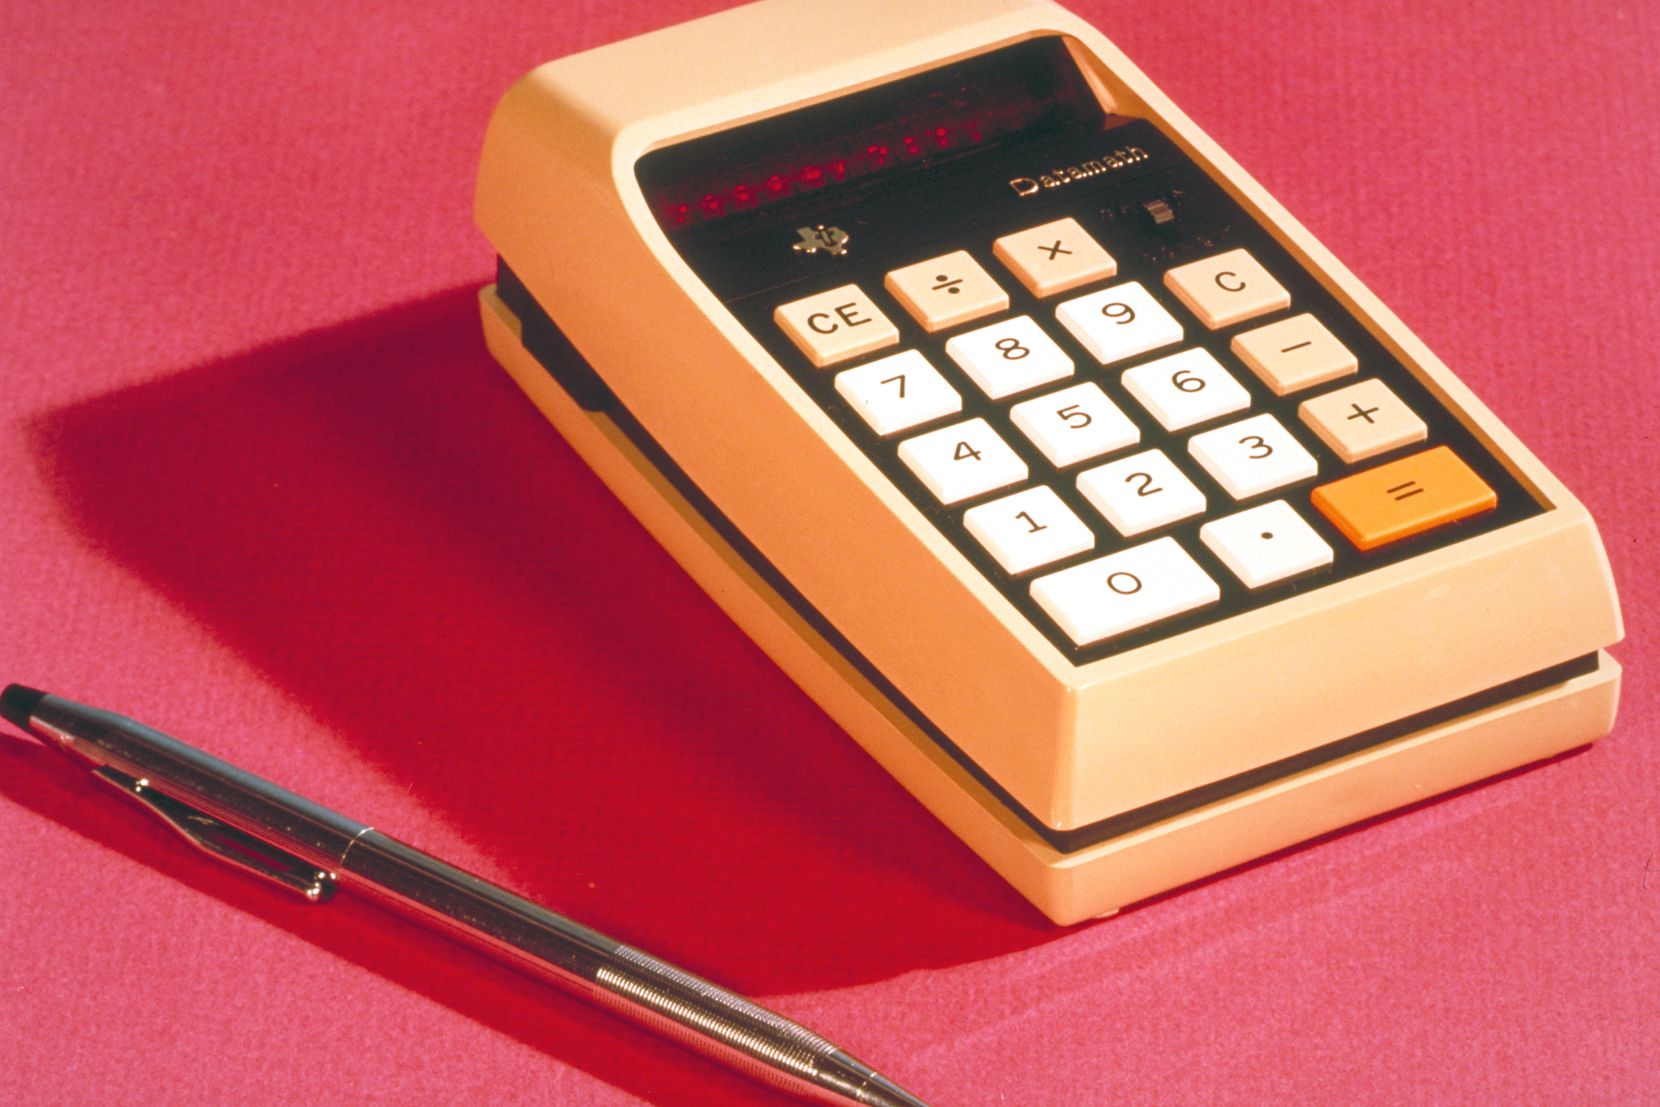 After going all-in with its chips, Texas Instruments tried its hand at toys  and calculators